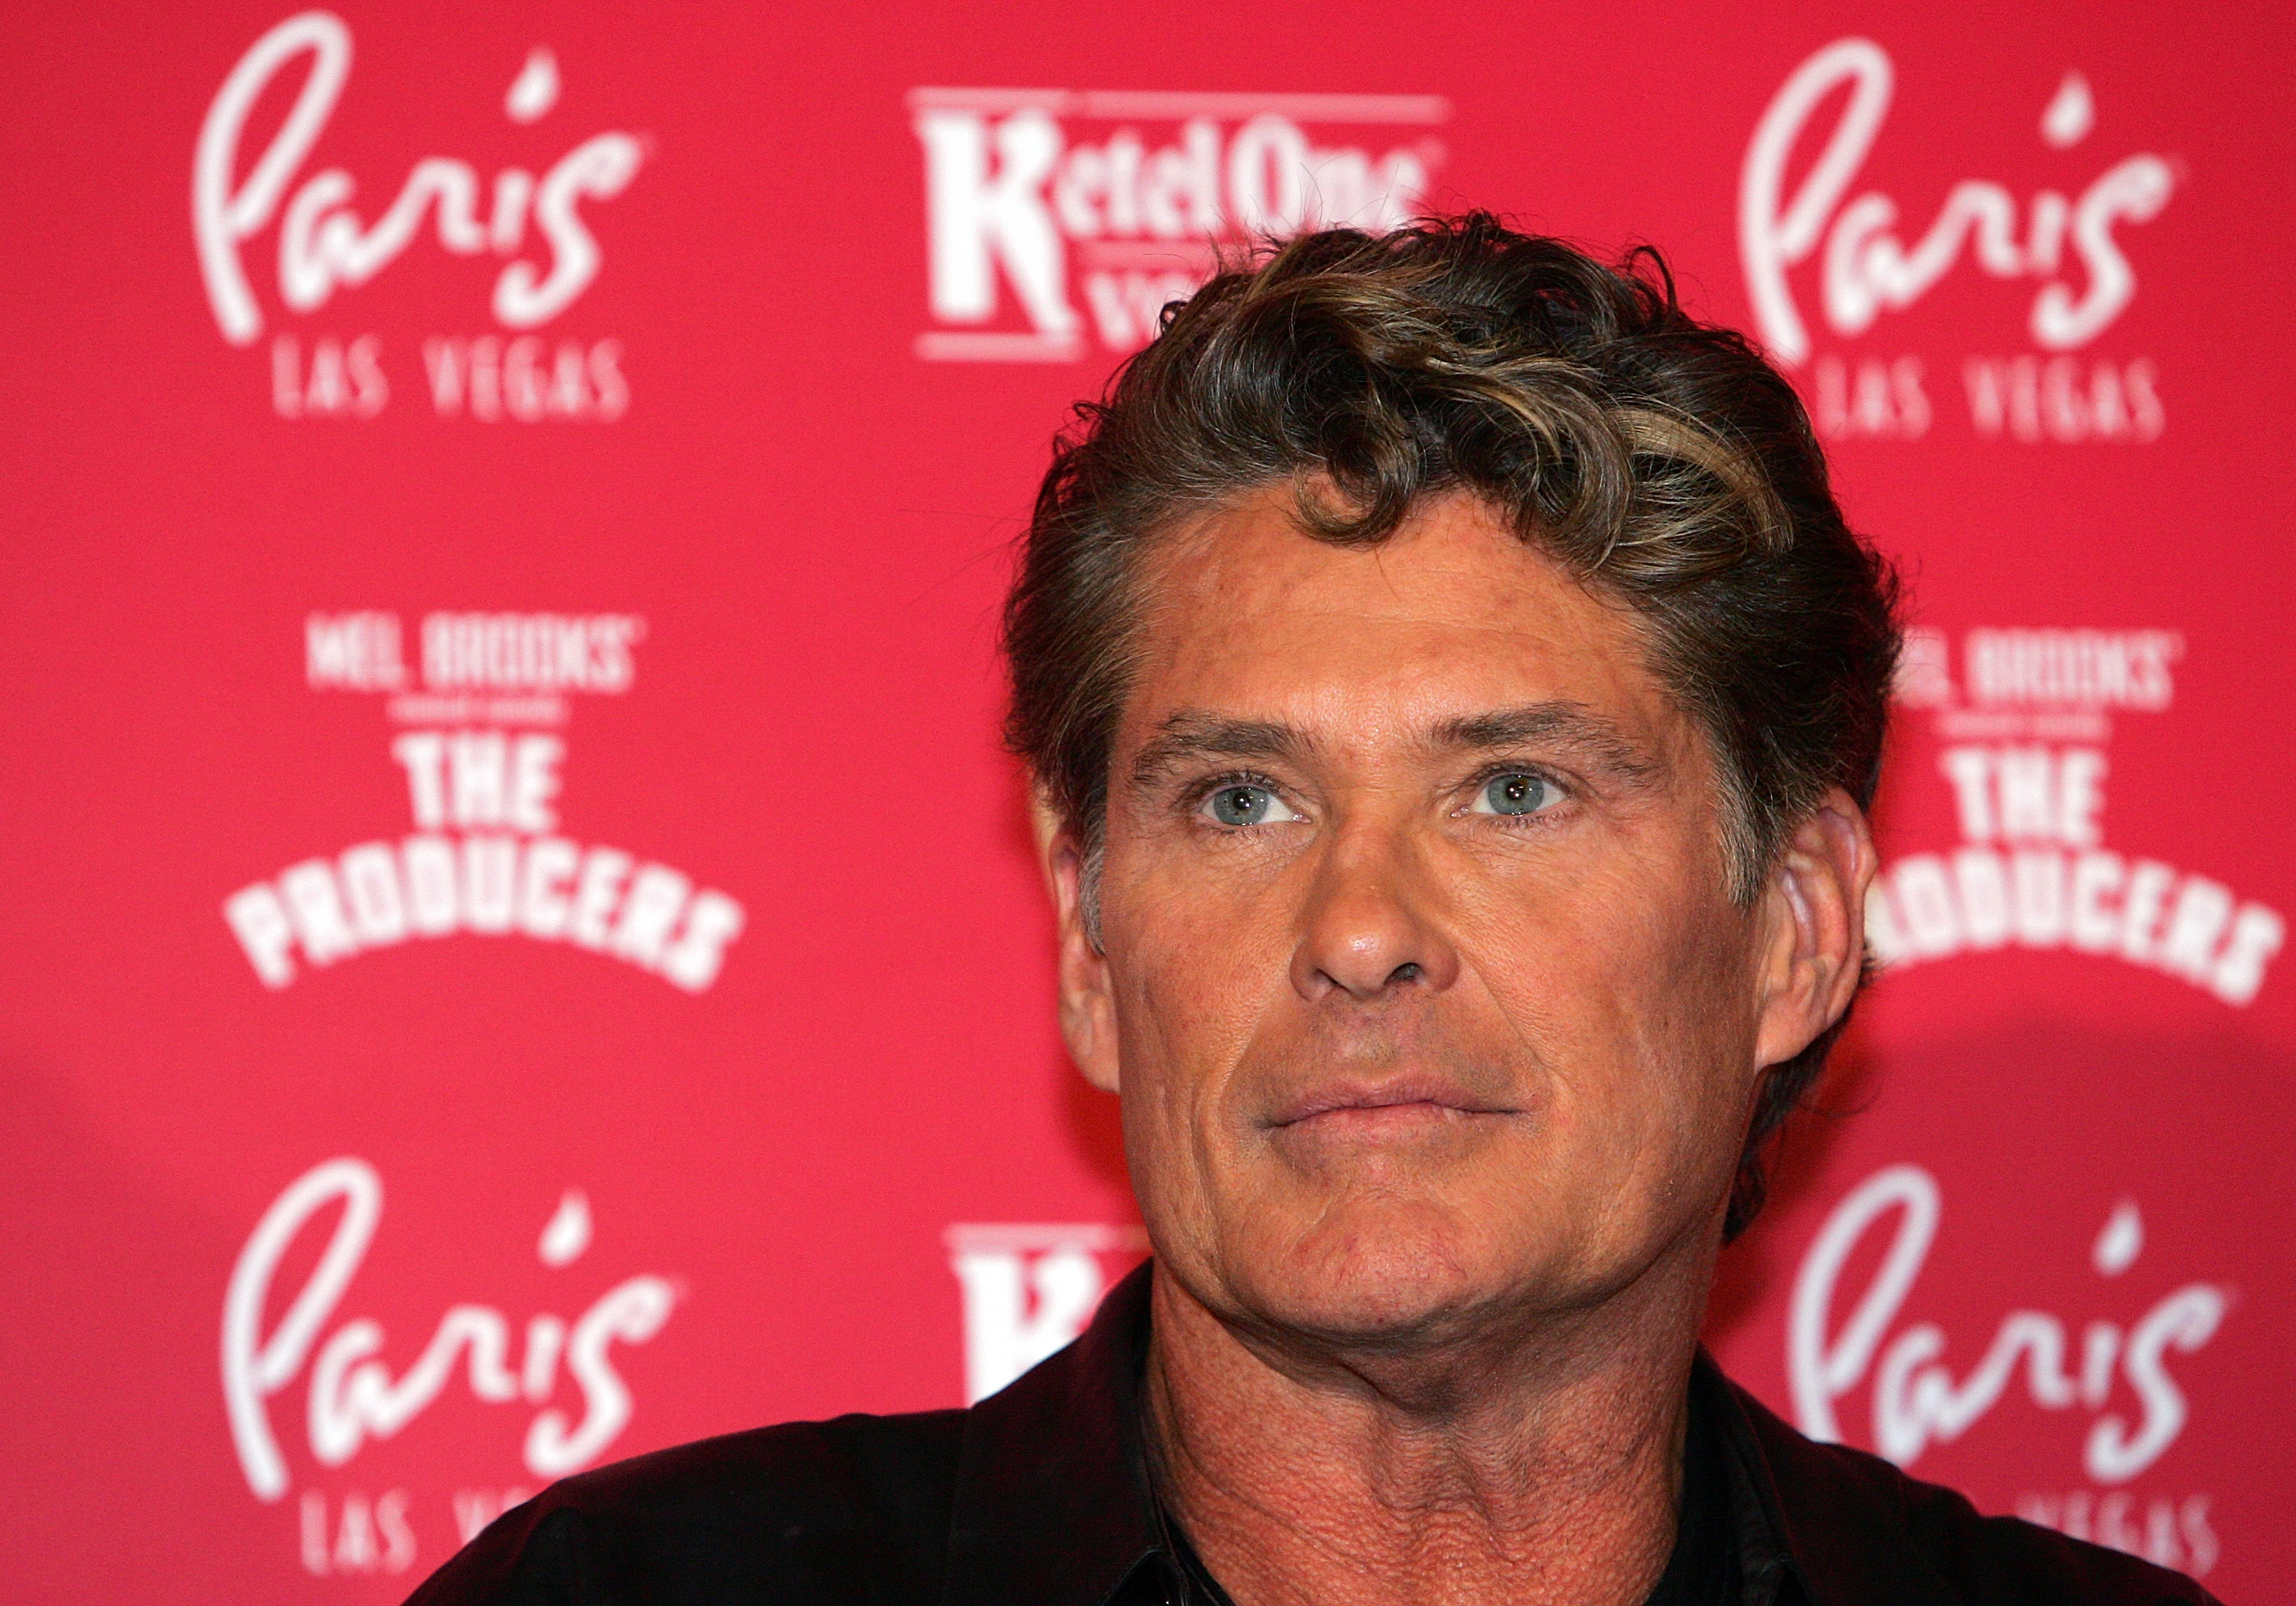 David Hasselhoff during a news conference for the musical comedy "The Producers" on February 9, 2007 in Las Vegas, Nevada. | Source: Getty Images